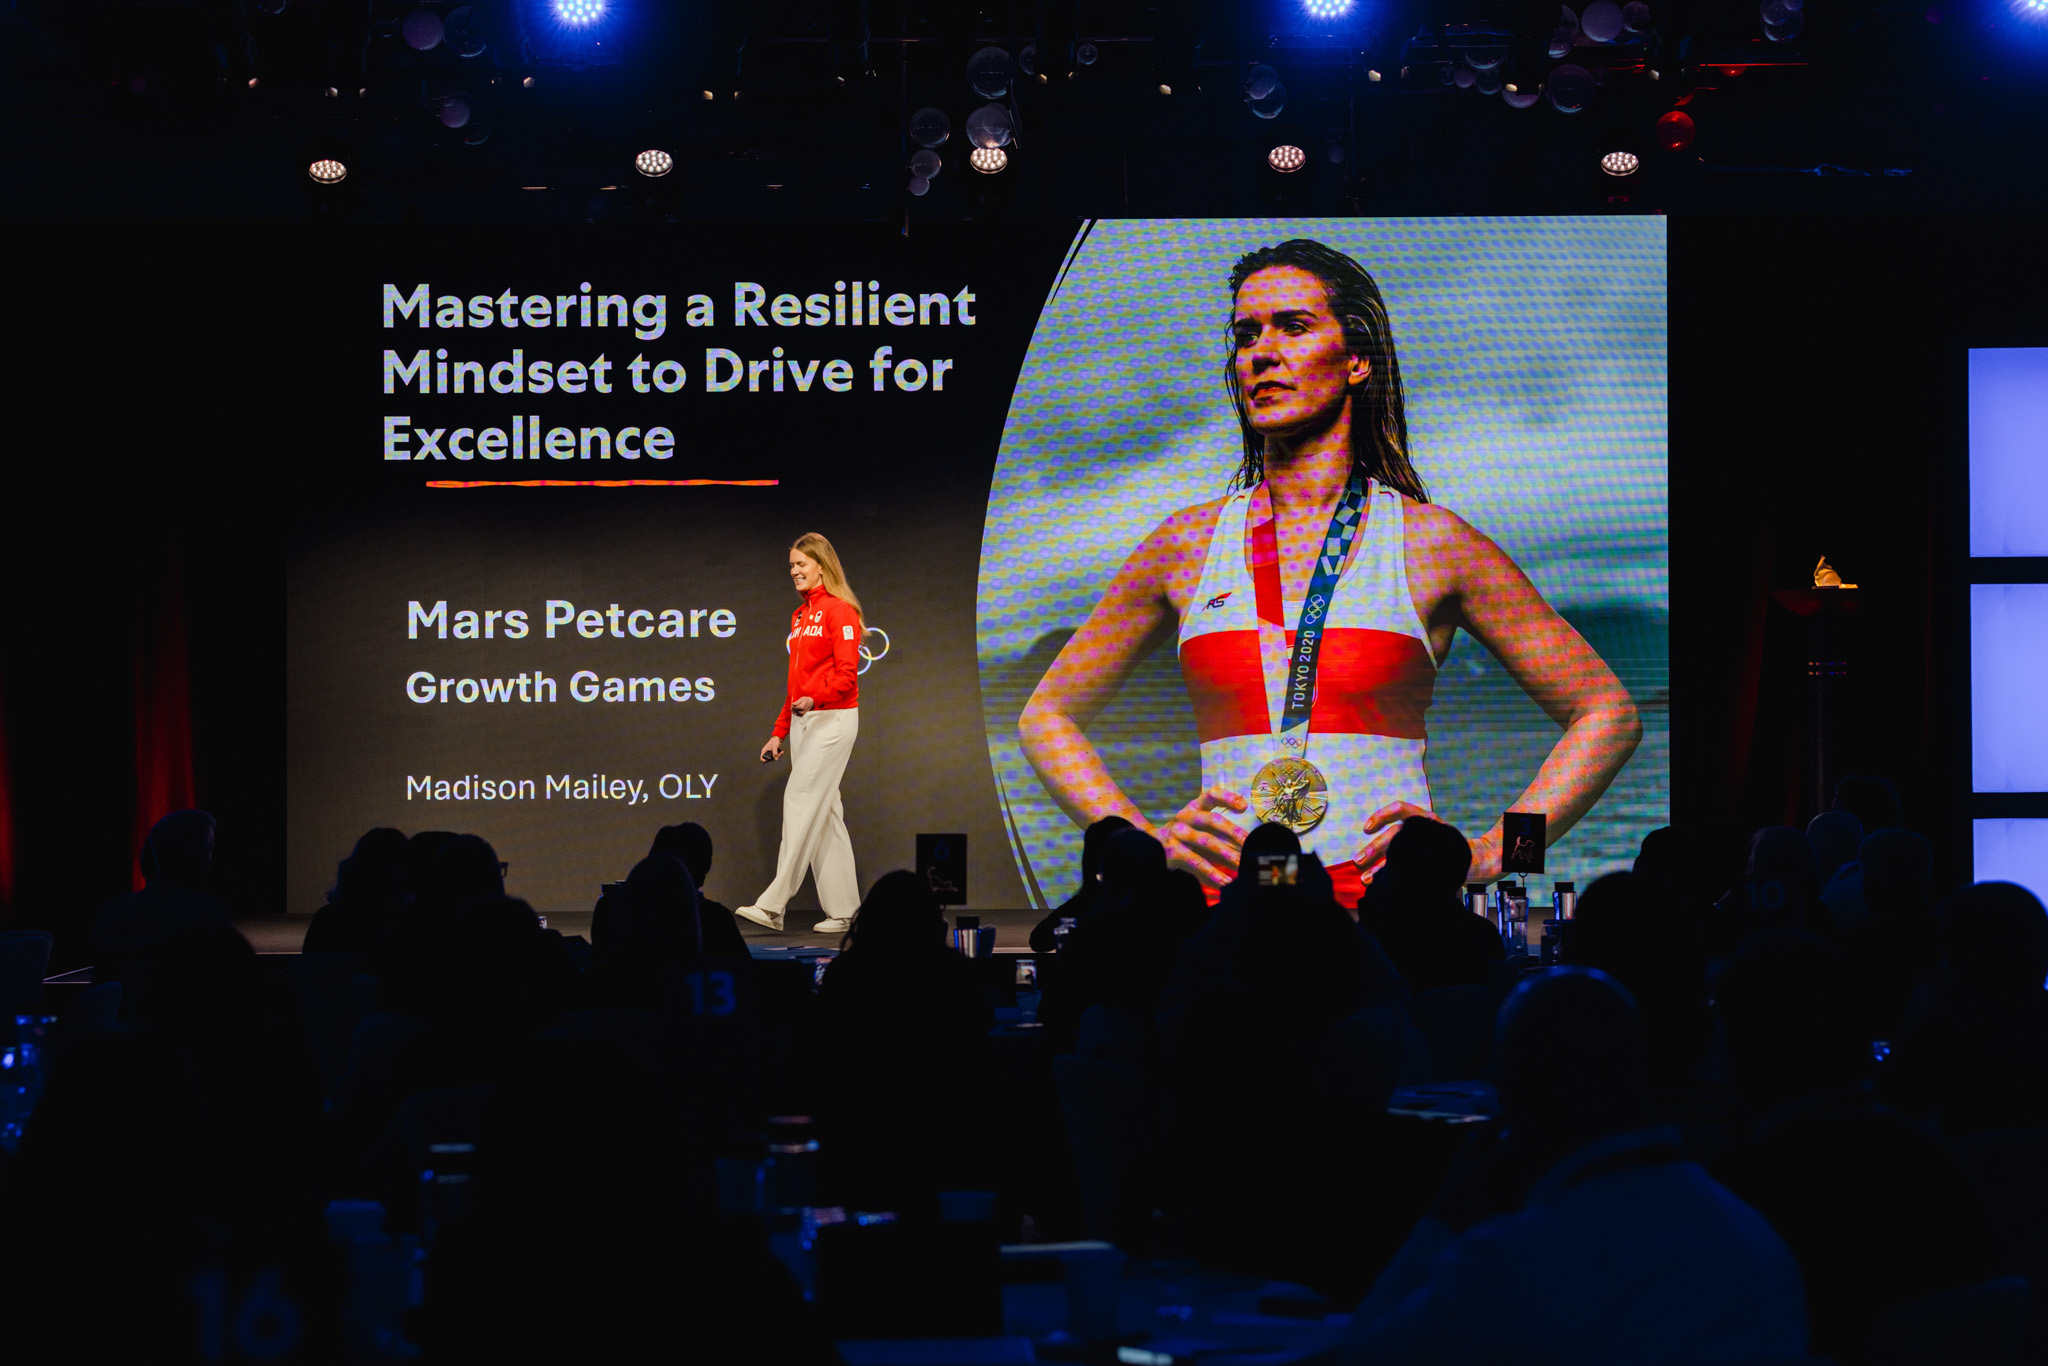 A woman stands on stage presenting in front of an audience with a large screen displaying a female athlete, medals, and the text "Mastering a Resilient Mindset to Drive for Excellence" along with other corporate photography details.